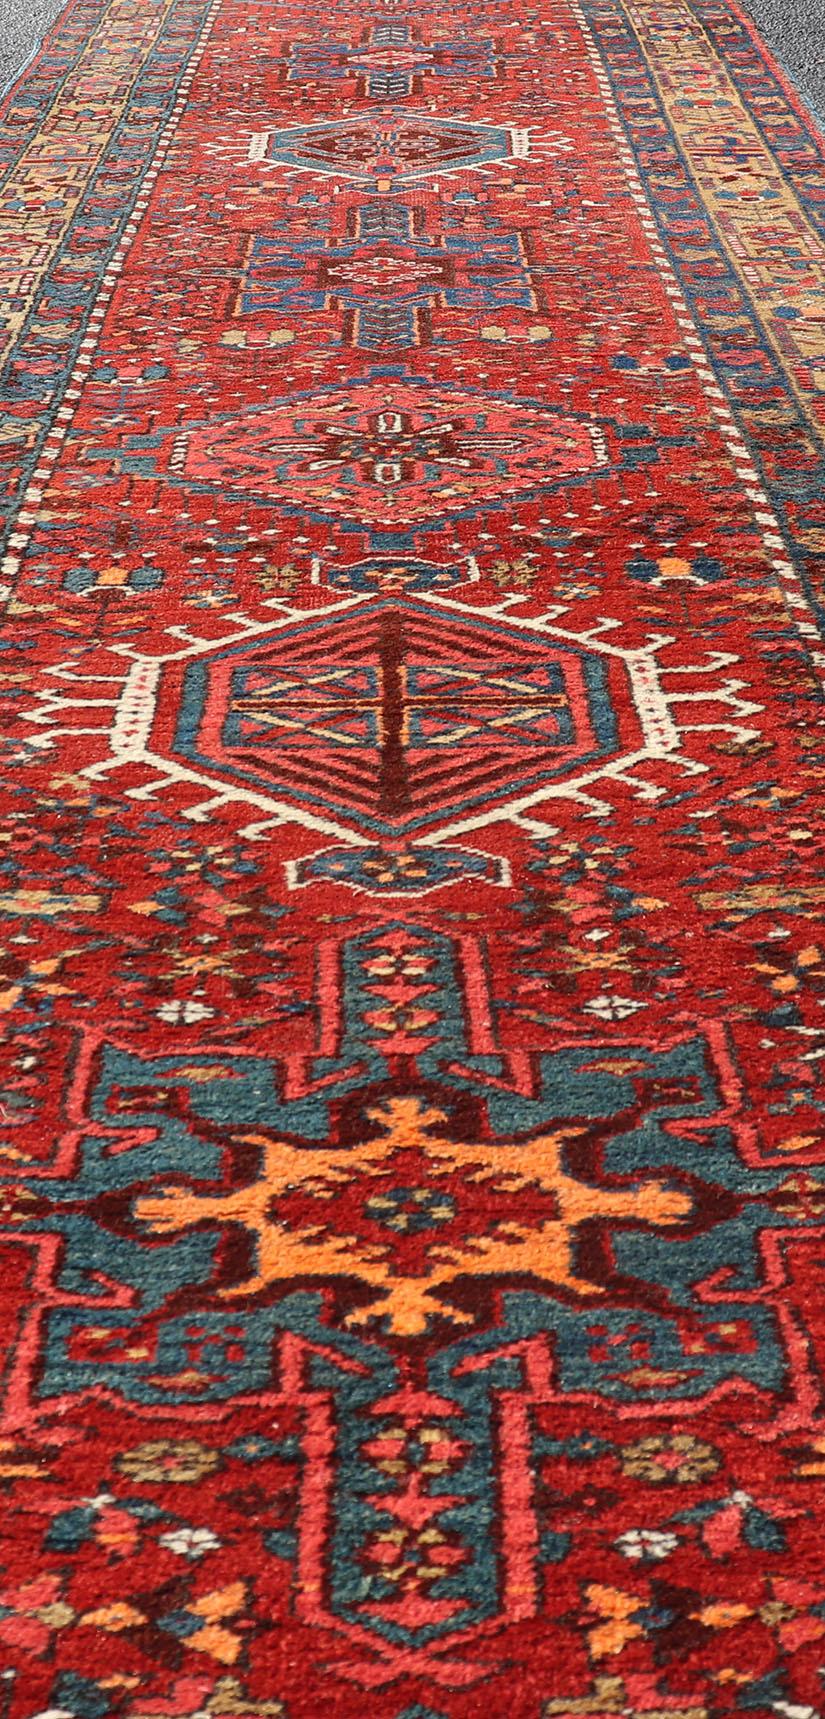 Antique Geometric Persian Long Heriz Runner in Red, Blue, Yellow, Teal, Orange For Sale 1